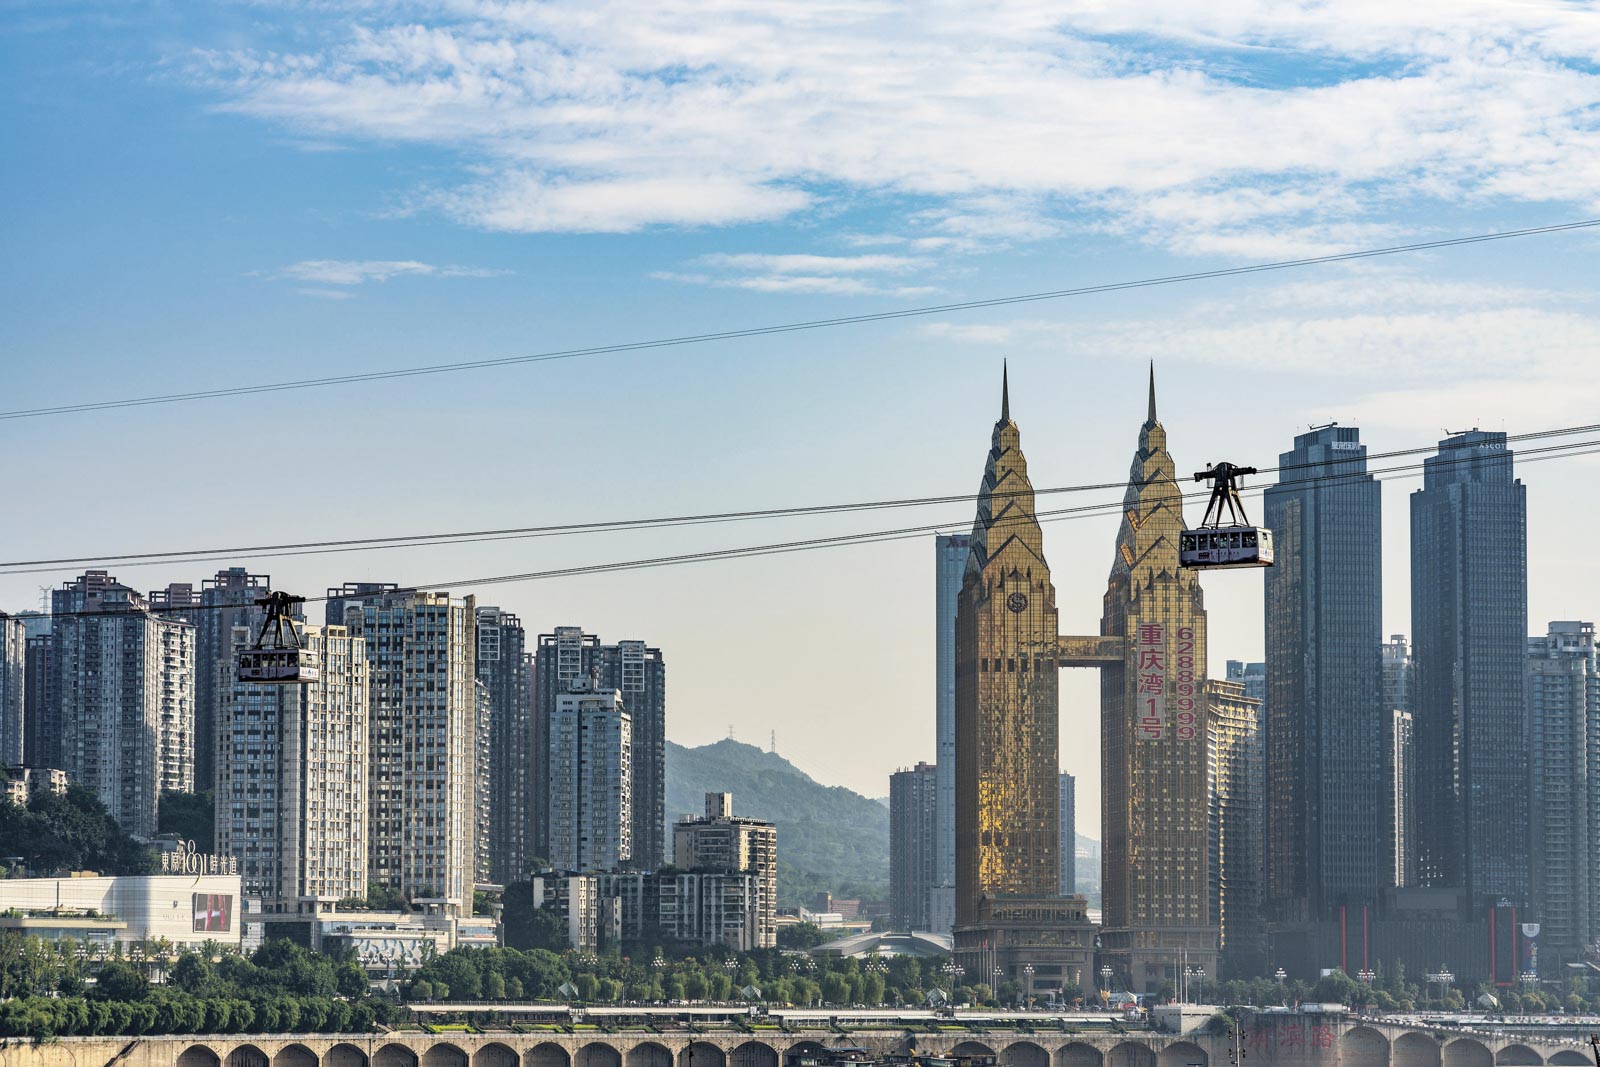 View of the Ropeway of the Yangtze river, a famous cable car which crosses the river with city buildings, Chongqing, China